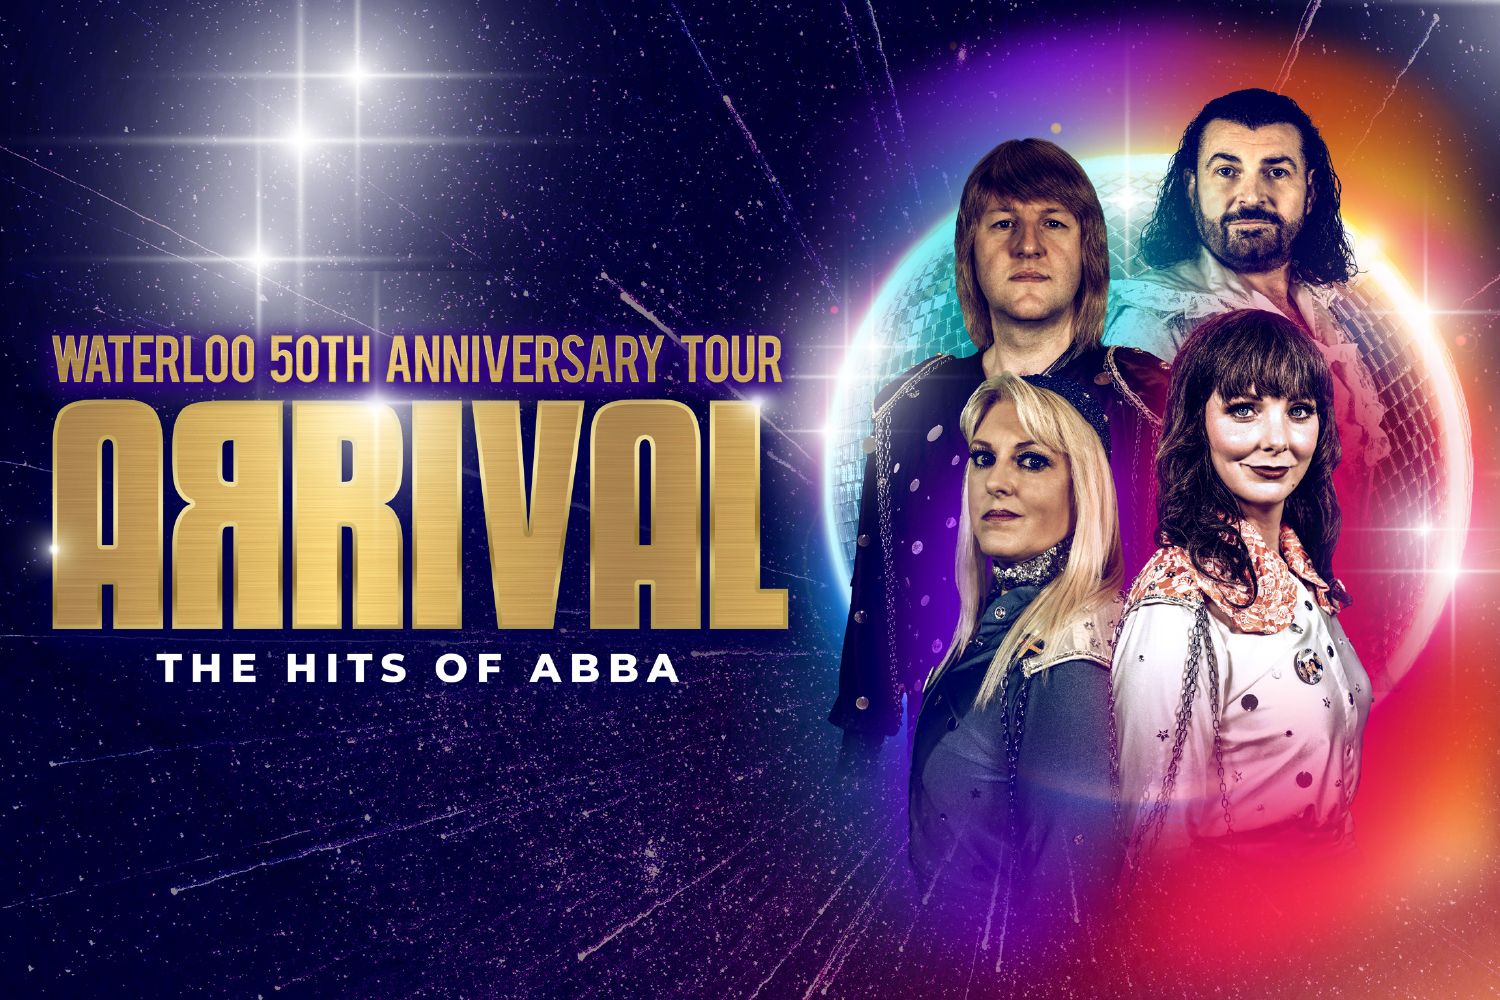 Arrival – The Hits of Abba